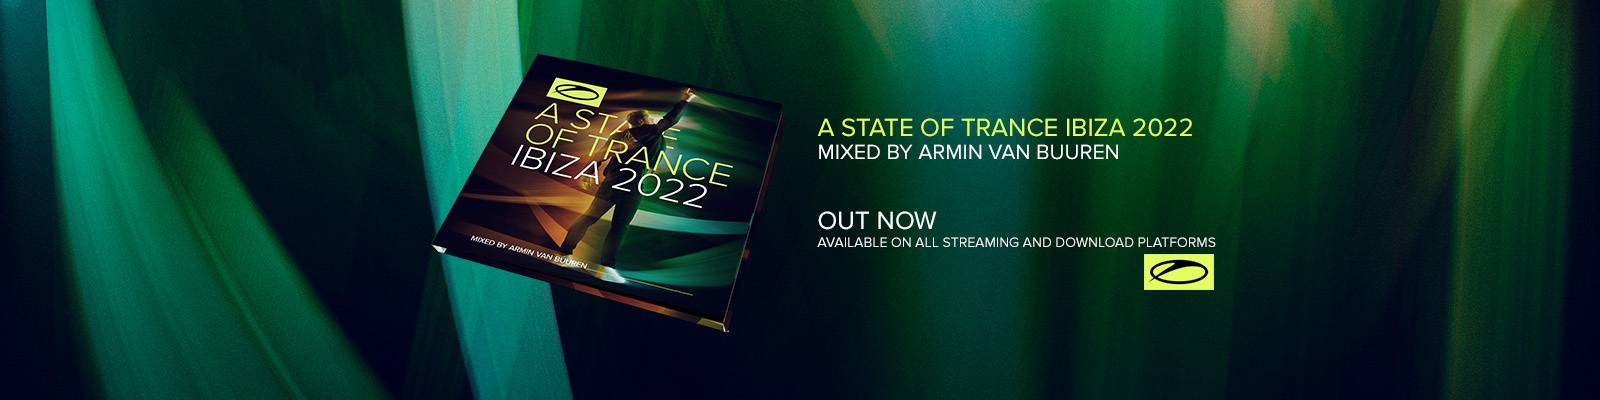 Out now: A State Of Trance, Ibiza 2022